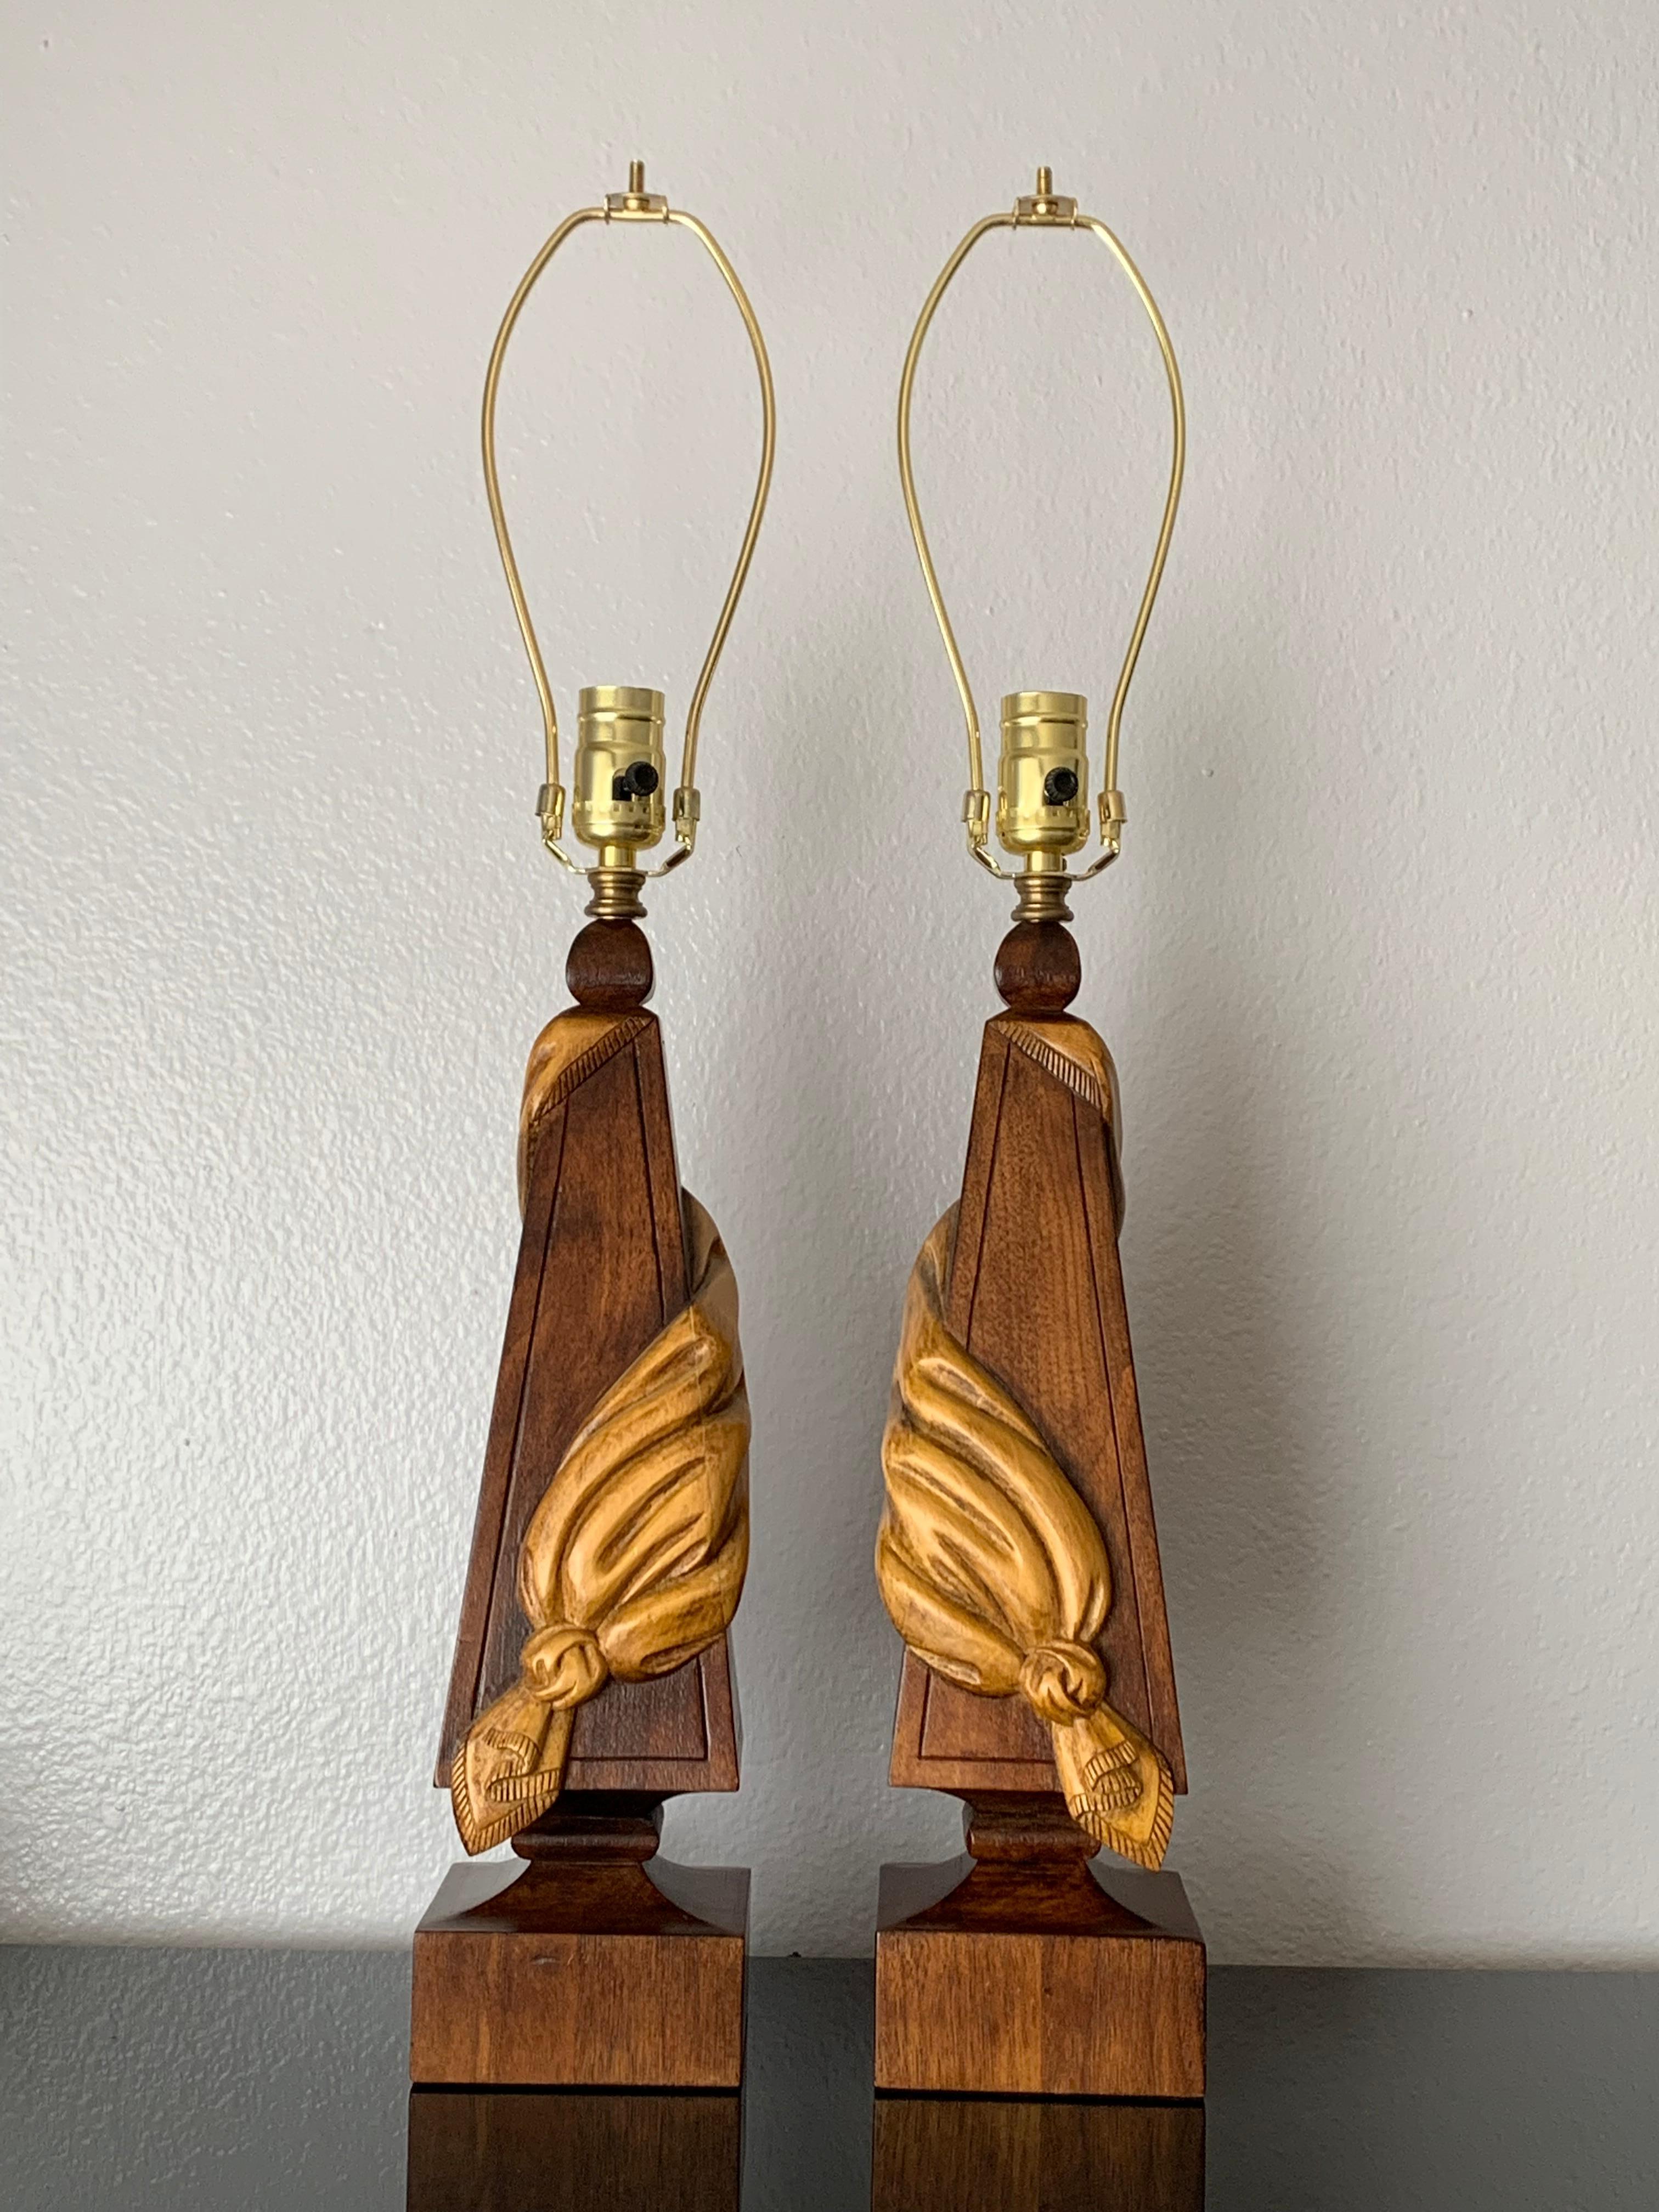 Pair of tassel linen motif lamps in the style of Dorothy Thorpe
Made of walnut and maple. Wooden part is 16